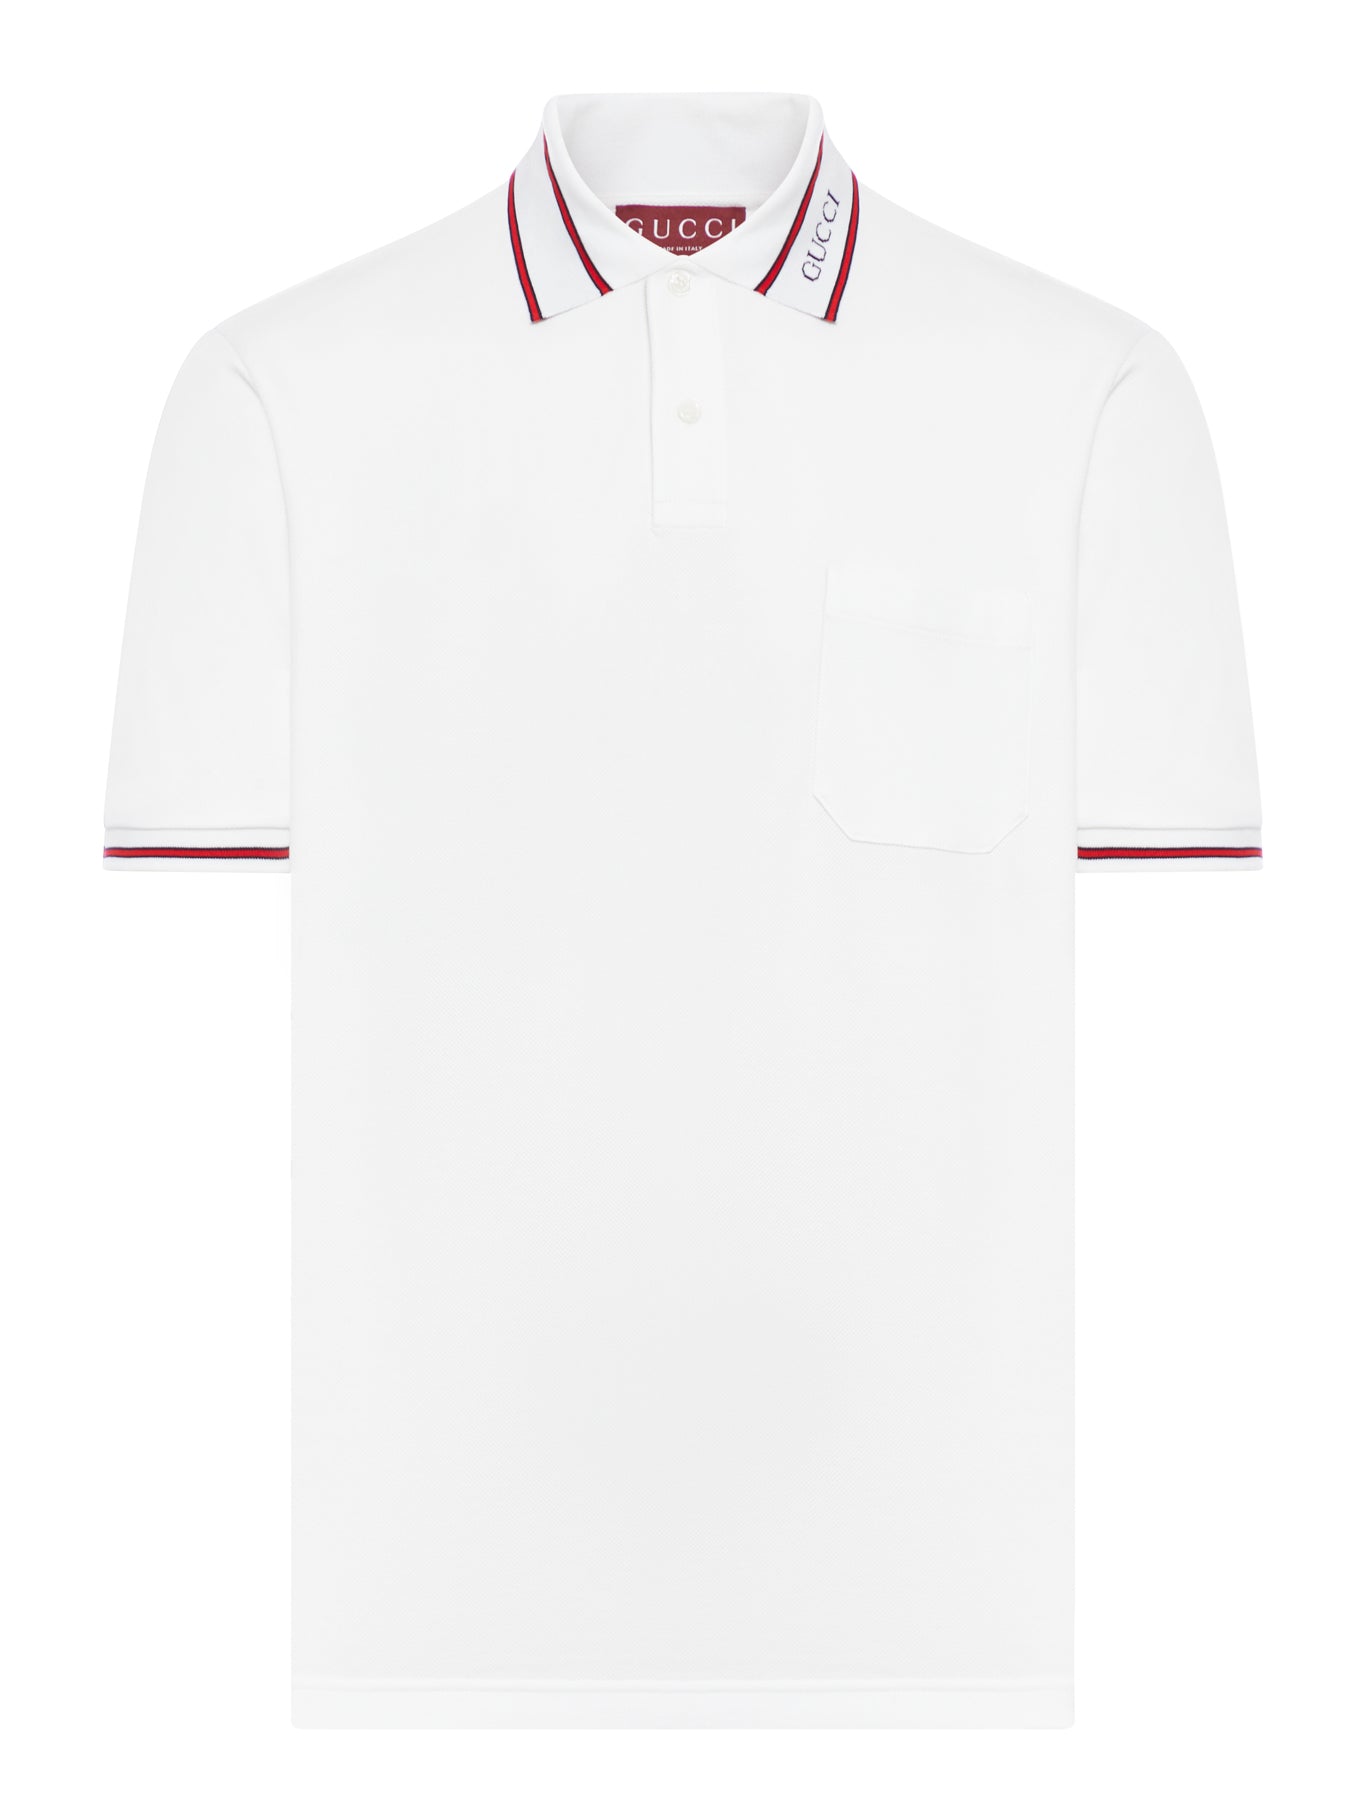 COTTON PIQUE POLO SHIRT WITH WEB FINISHES